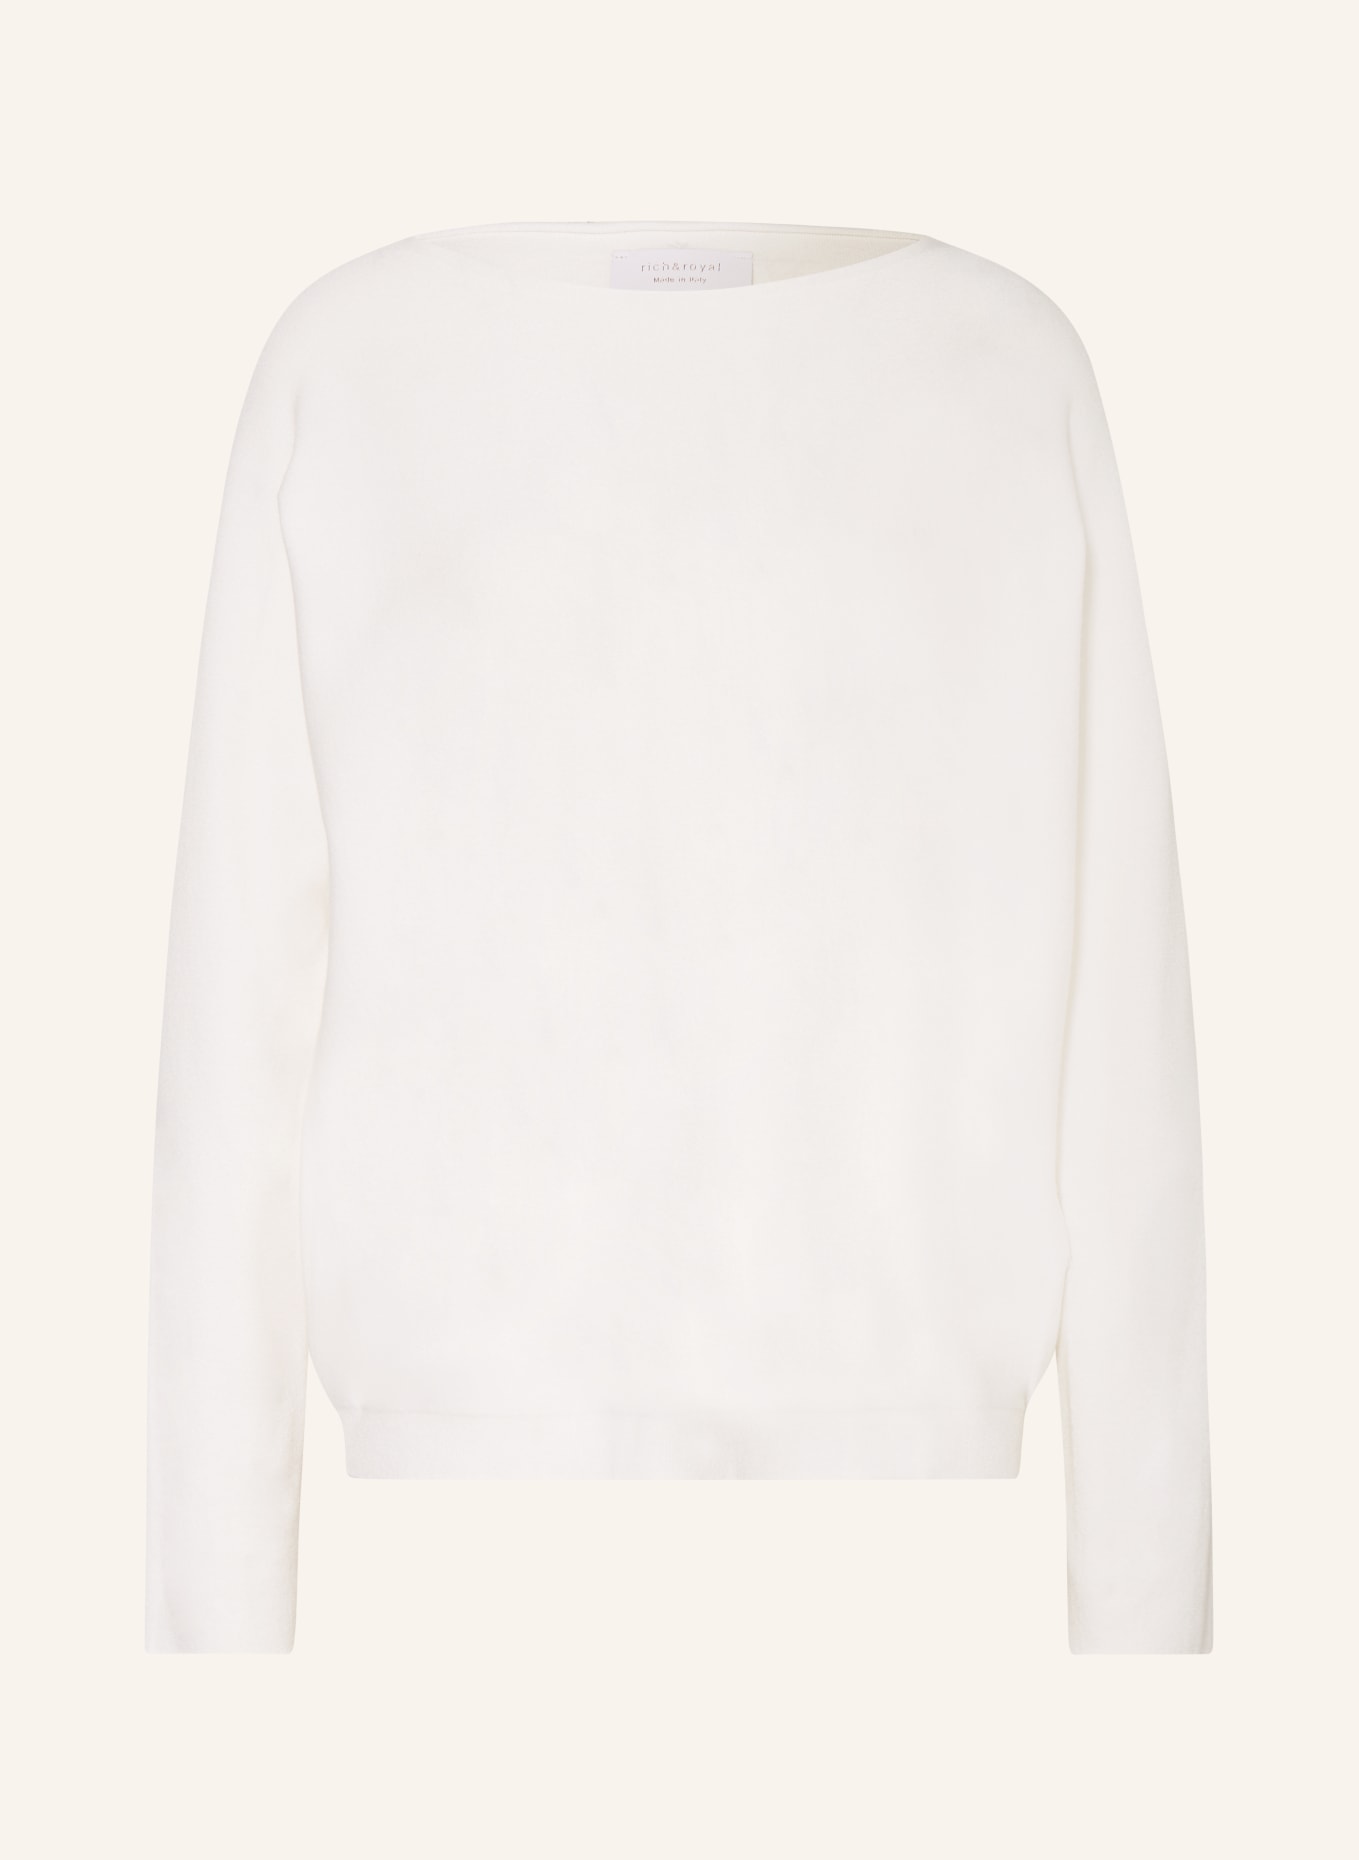 rich&royal Pullover, Farbe: WEISS (Bild 1)